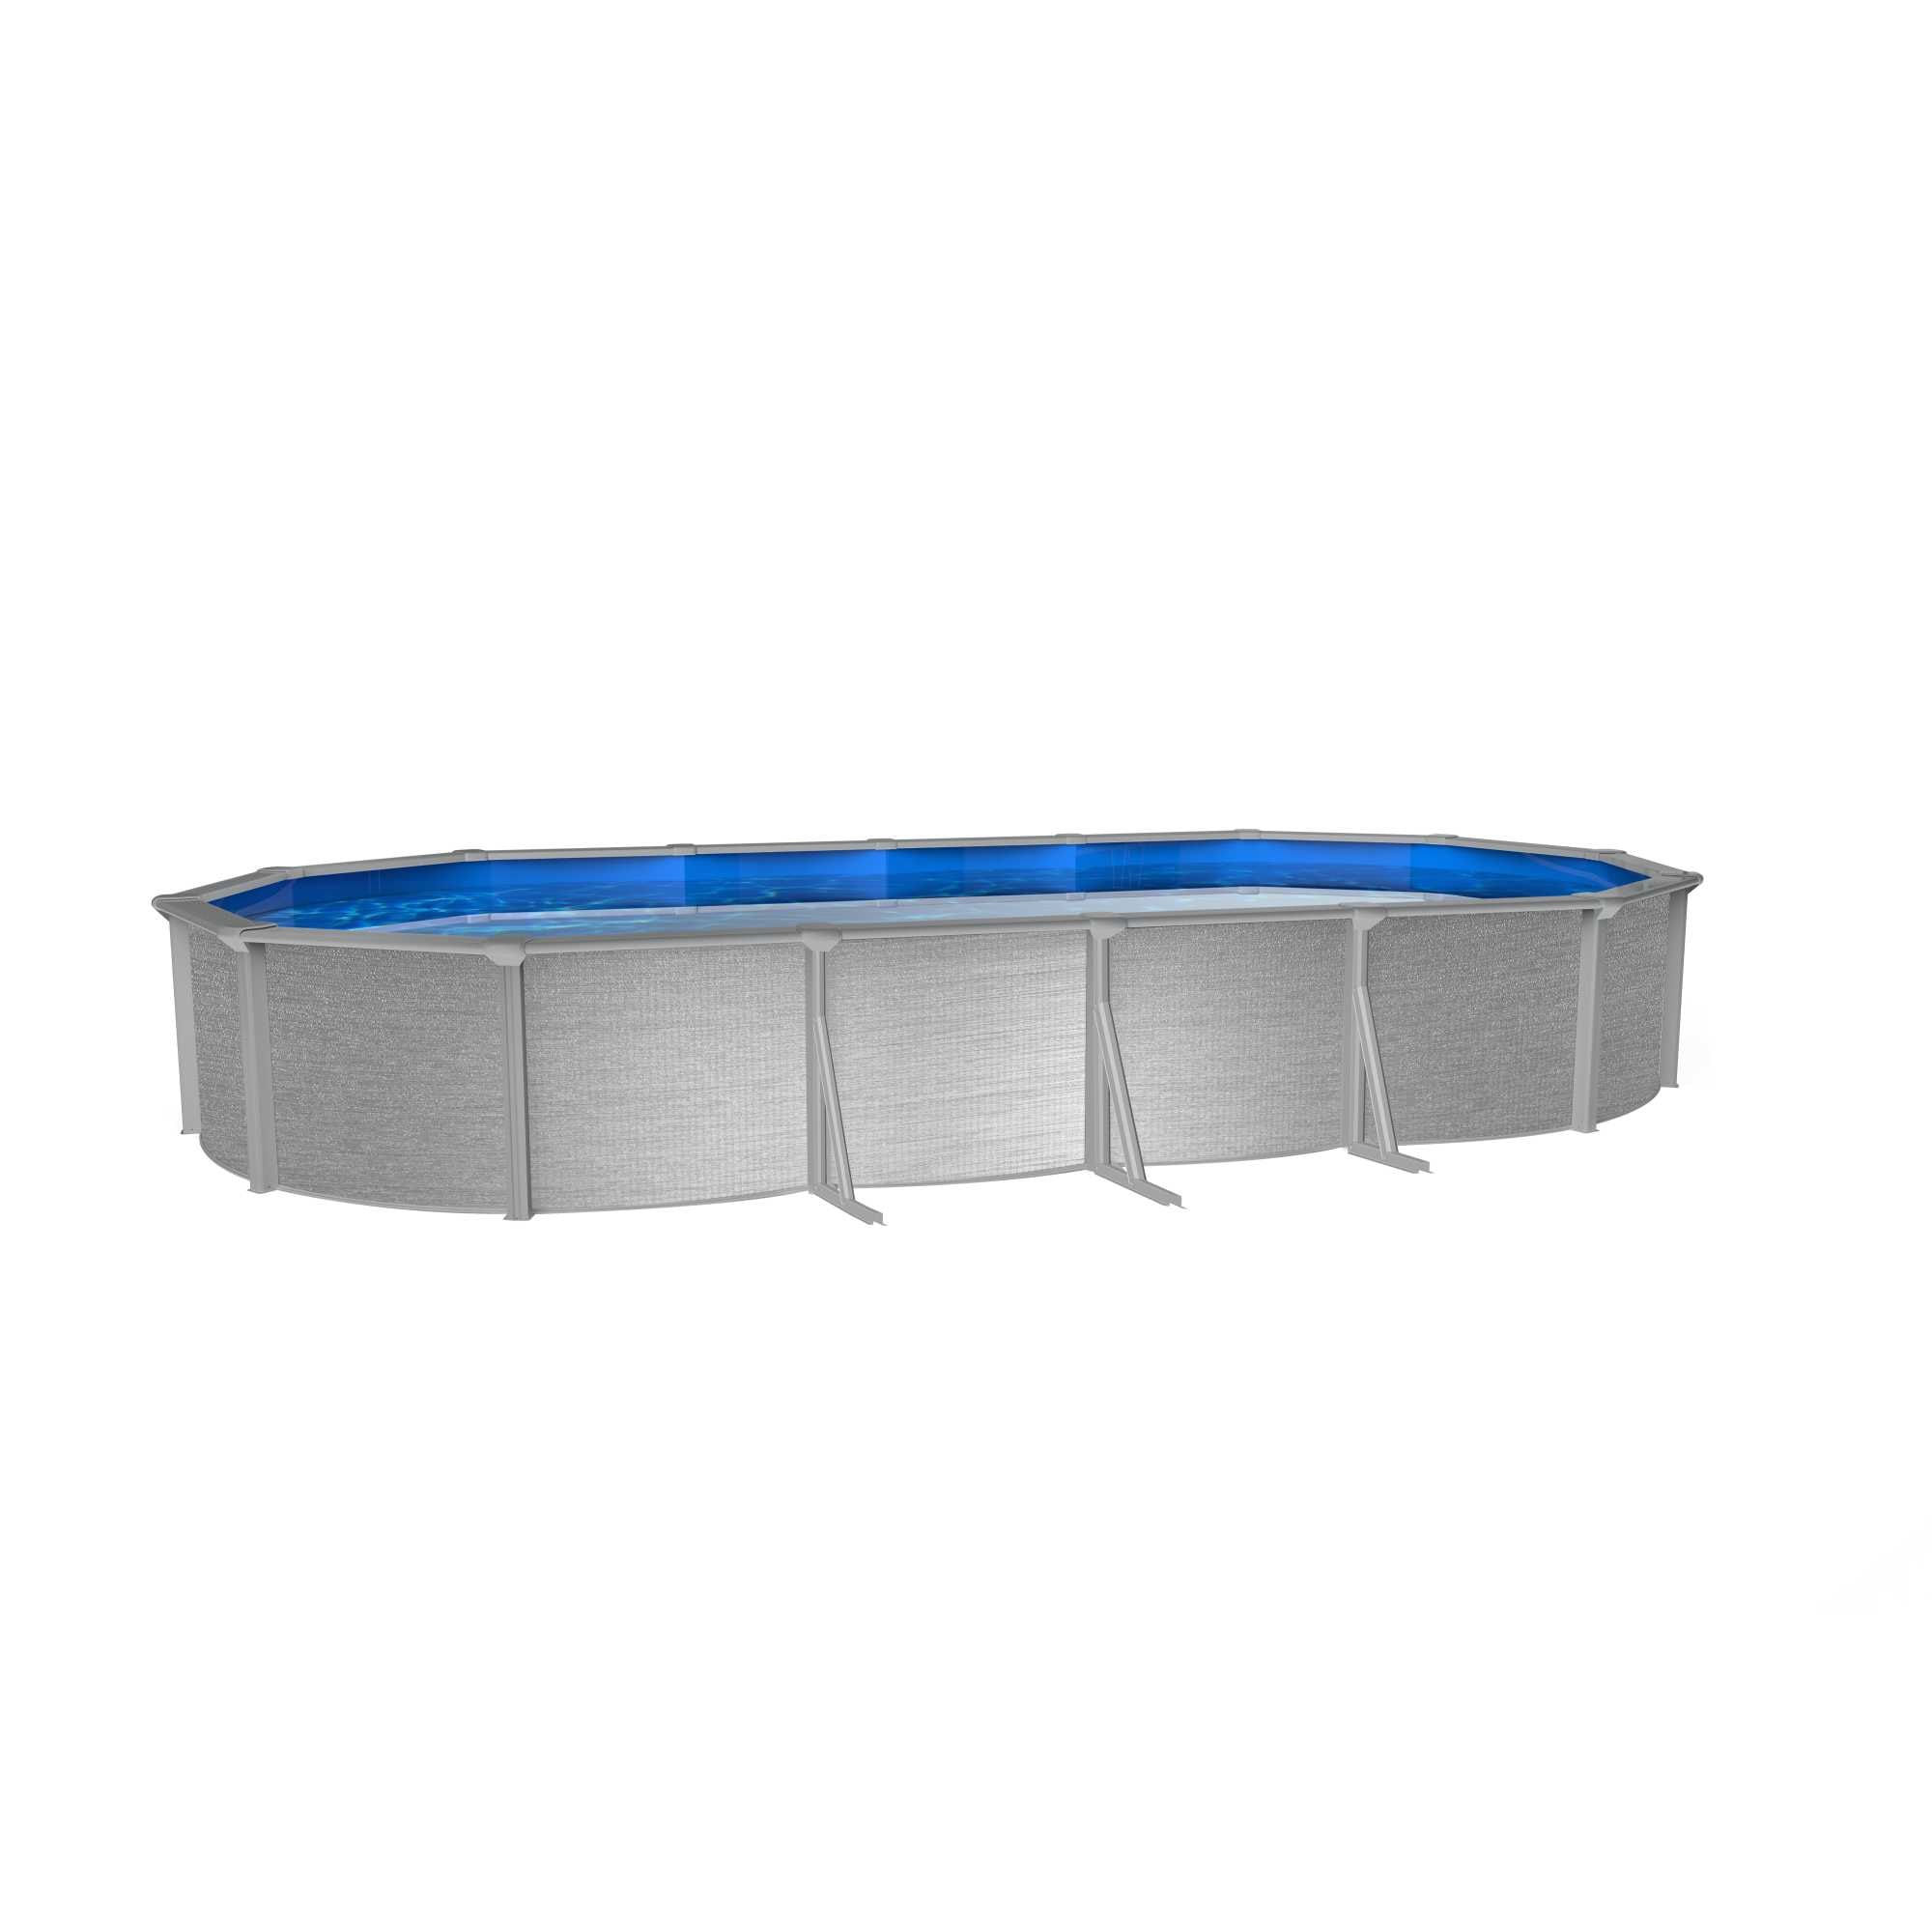 15 Ft X 52 In Oval Above Ground Pool, 15×30 Oval Above Ground Pool